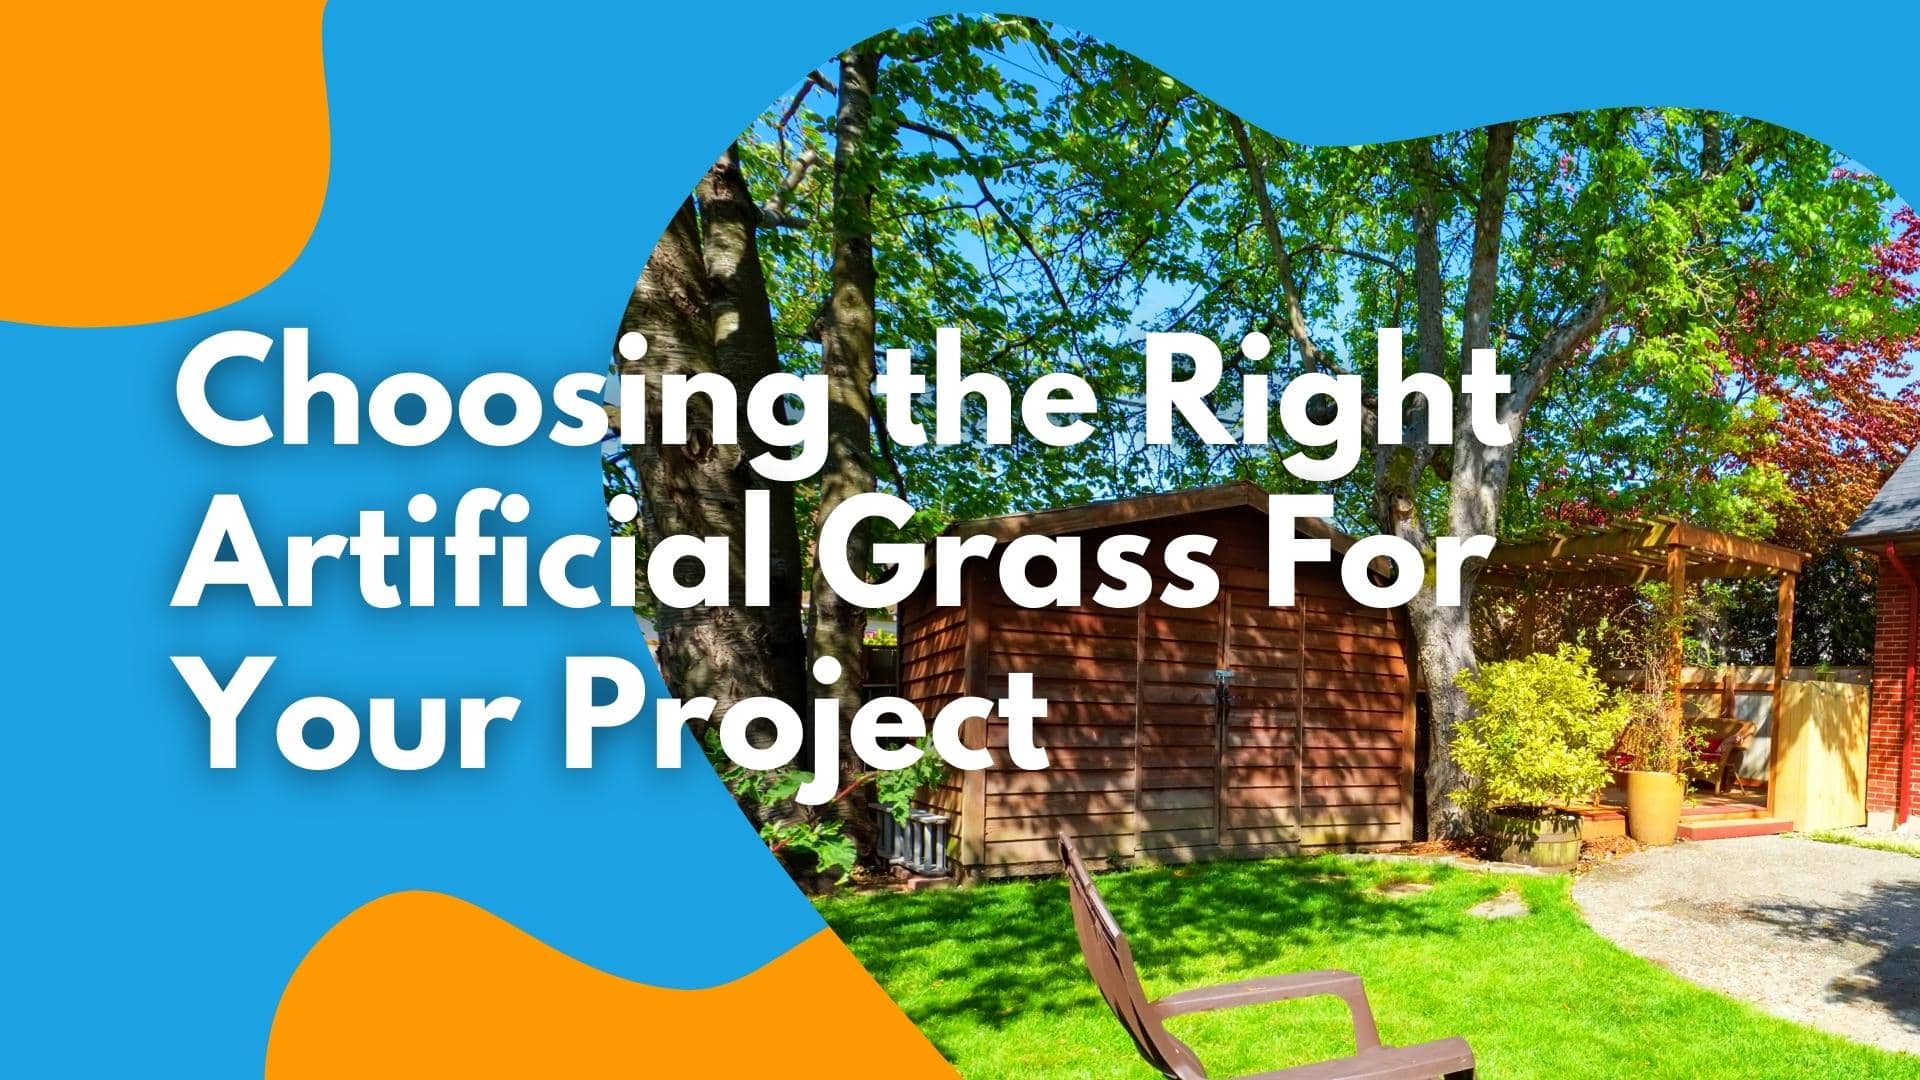 Choosing the Right Artificial Grass for Your Project